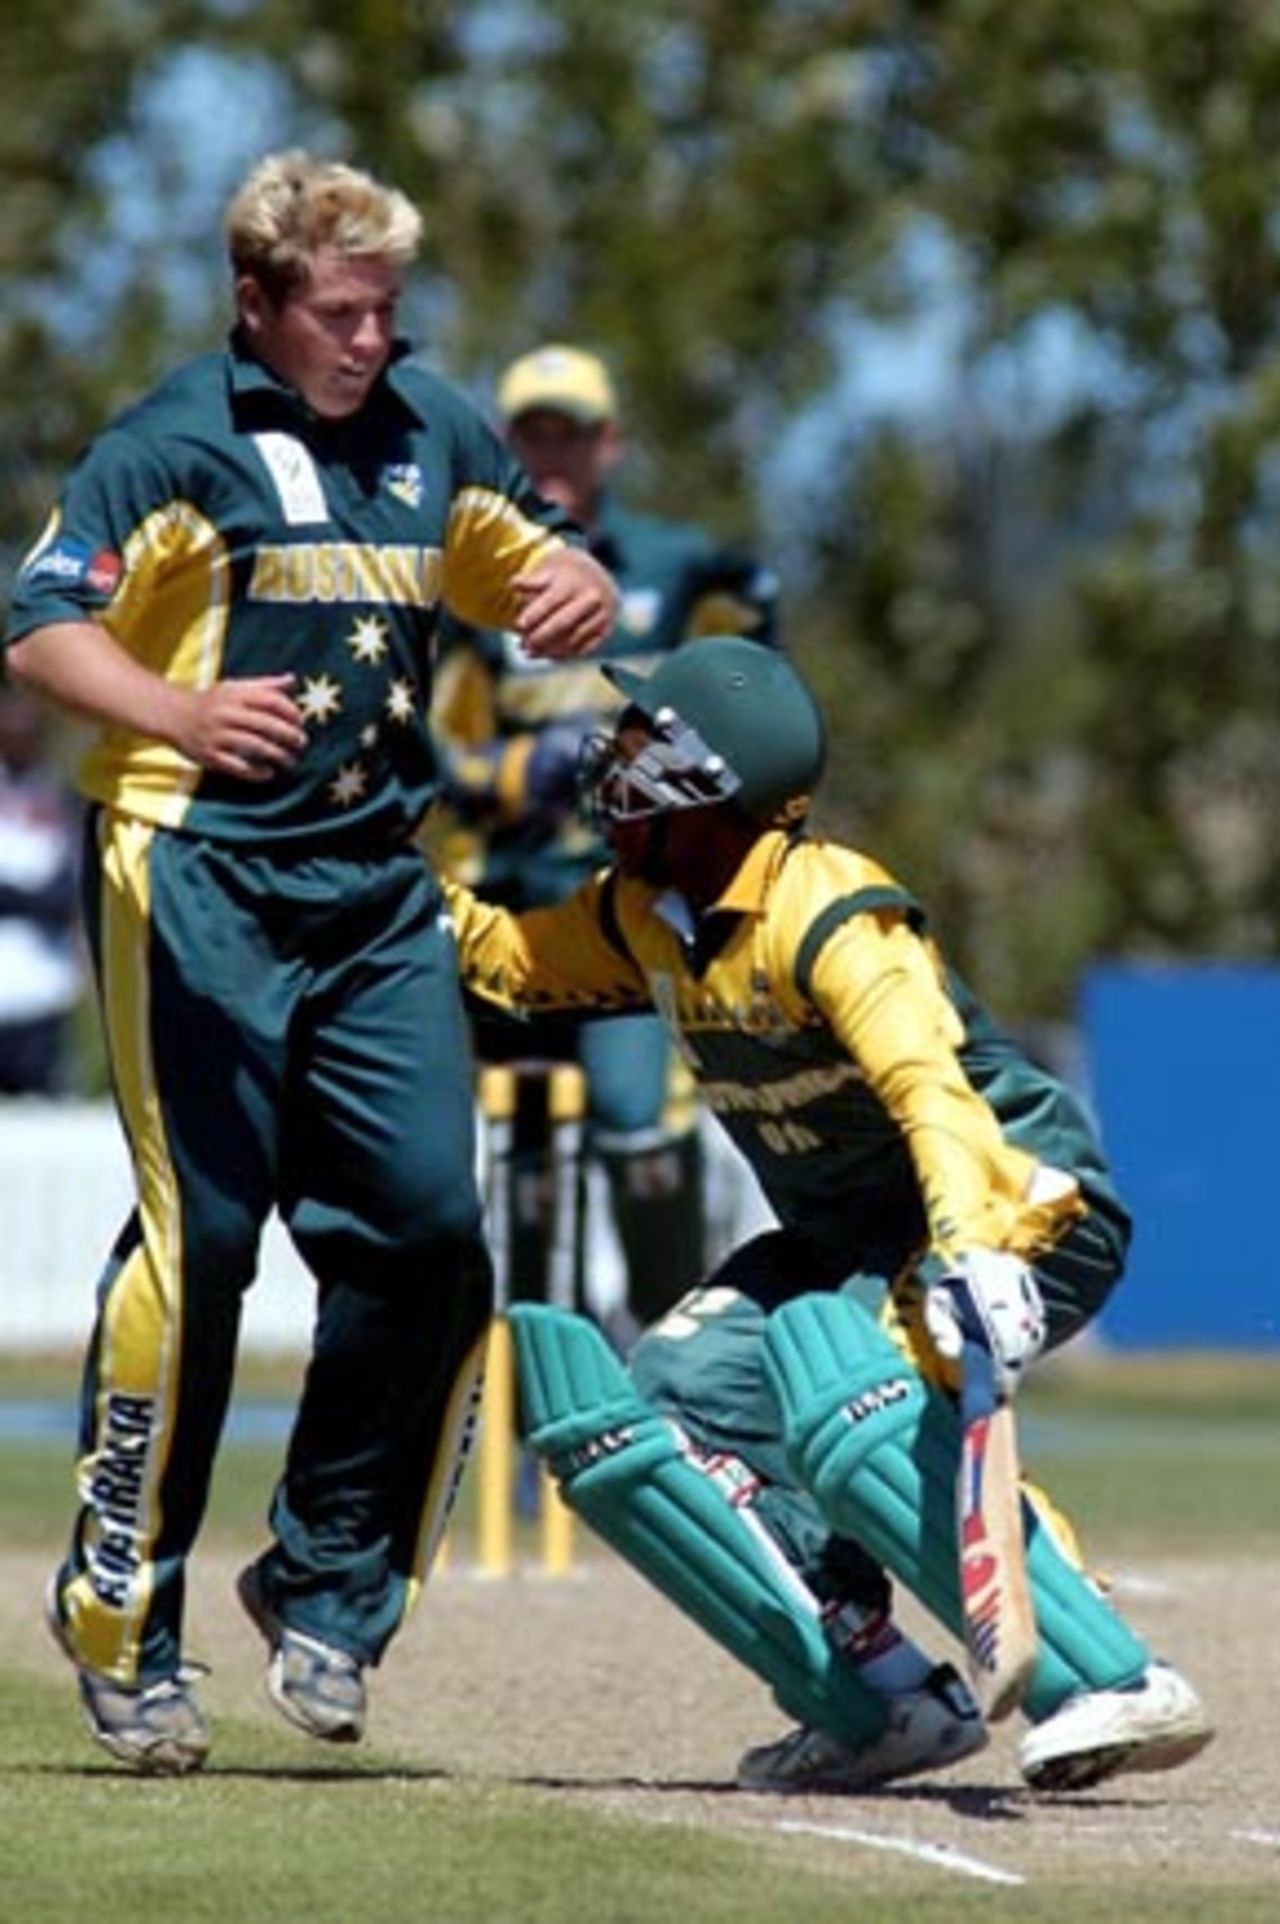 South Africa Under-19 batsman Zwelibanzi Homani (right) makes contact with Australia Under-19 bowler Mark Cosgrove as he turns for a second run during his innings of 52 not out. ICC Under-19 World Cup Super League Final: Australia Under-19s v South Africa Under-19s at Bert Sutcliffe Oval, Lincoln, 9 February 2002.